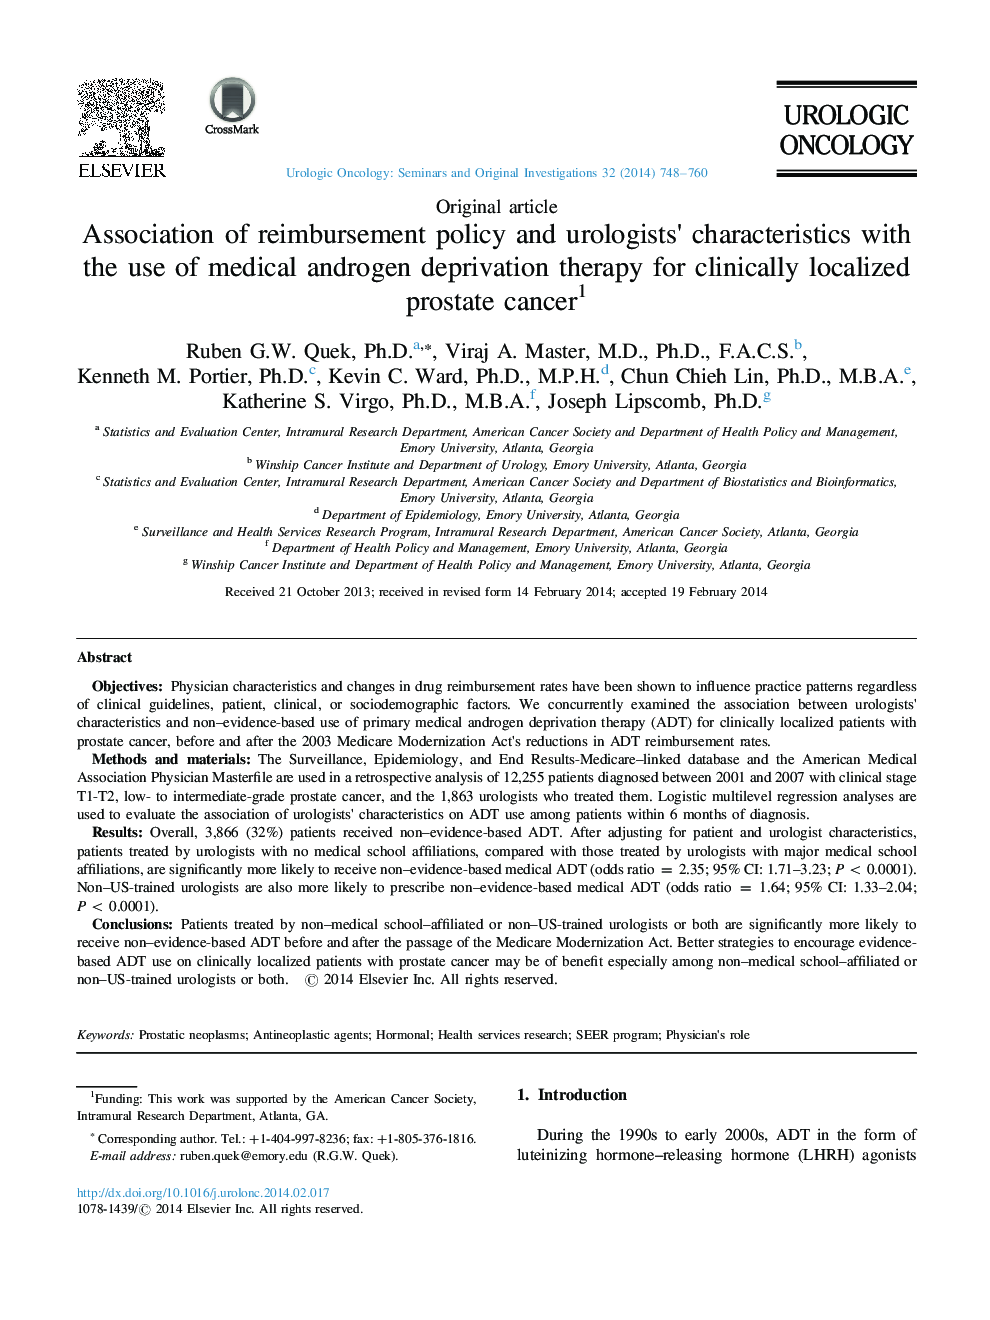 Association of reimbursement policy and urologists×³ characteristics with the use of medical androgen deprivation therapy for clinically localized prostate cancer1